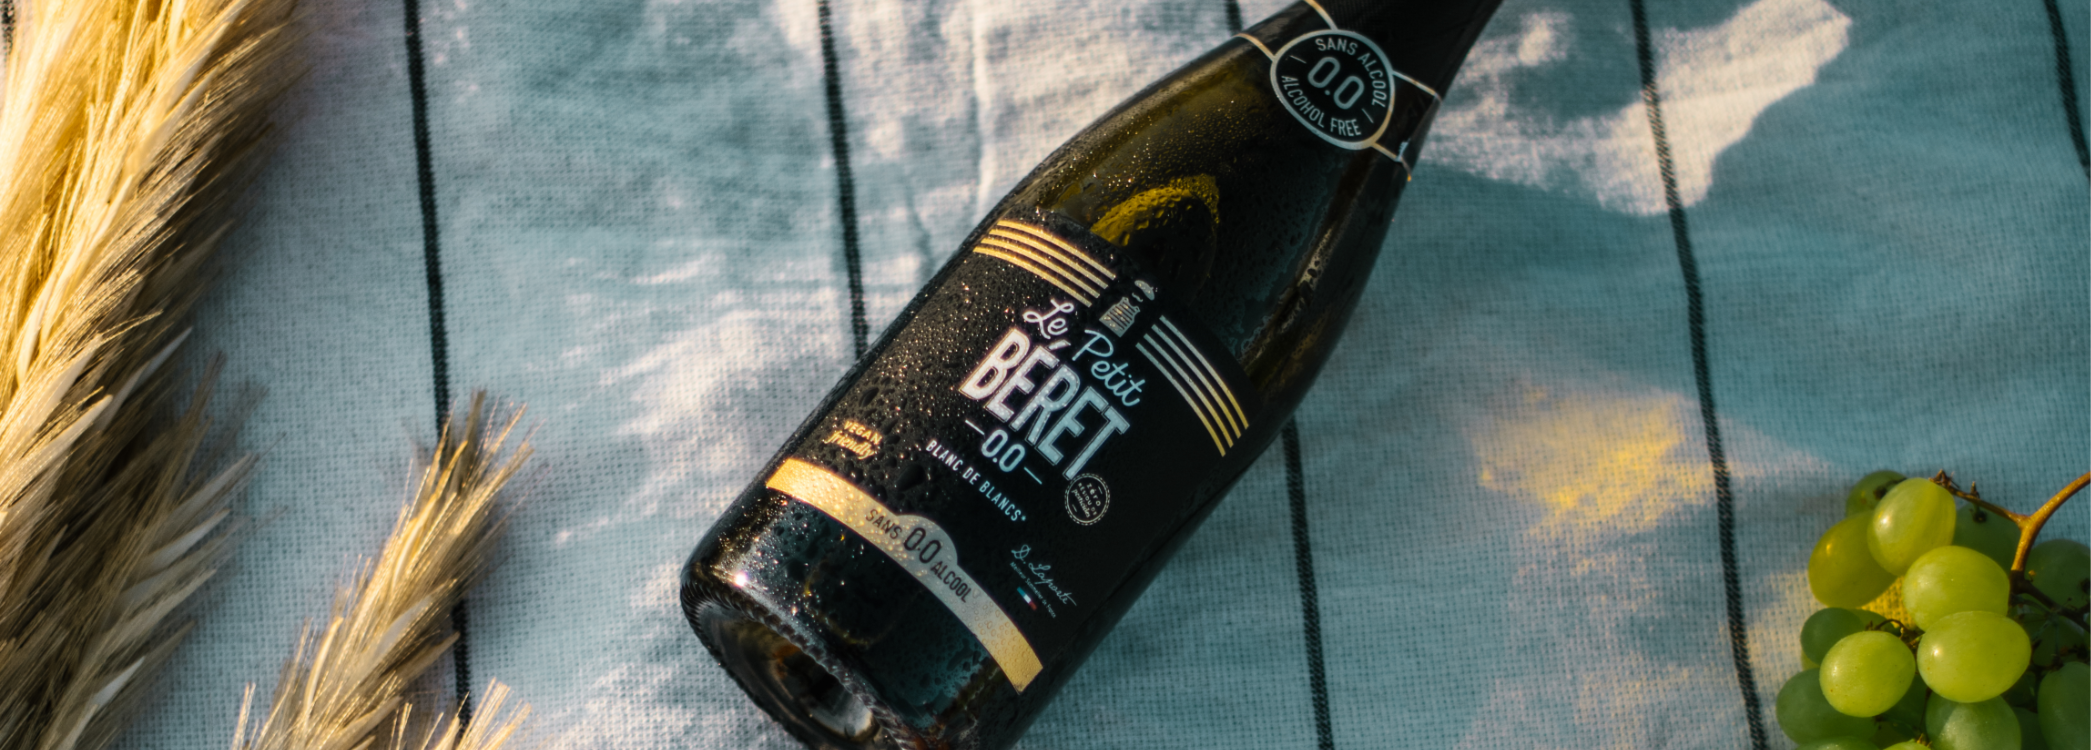 Le Petit Béret - Alcohol free wines, beers and spirits